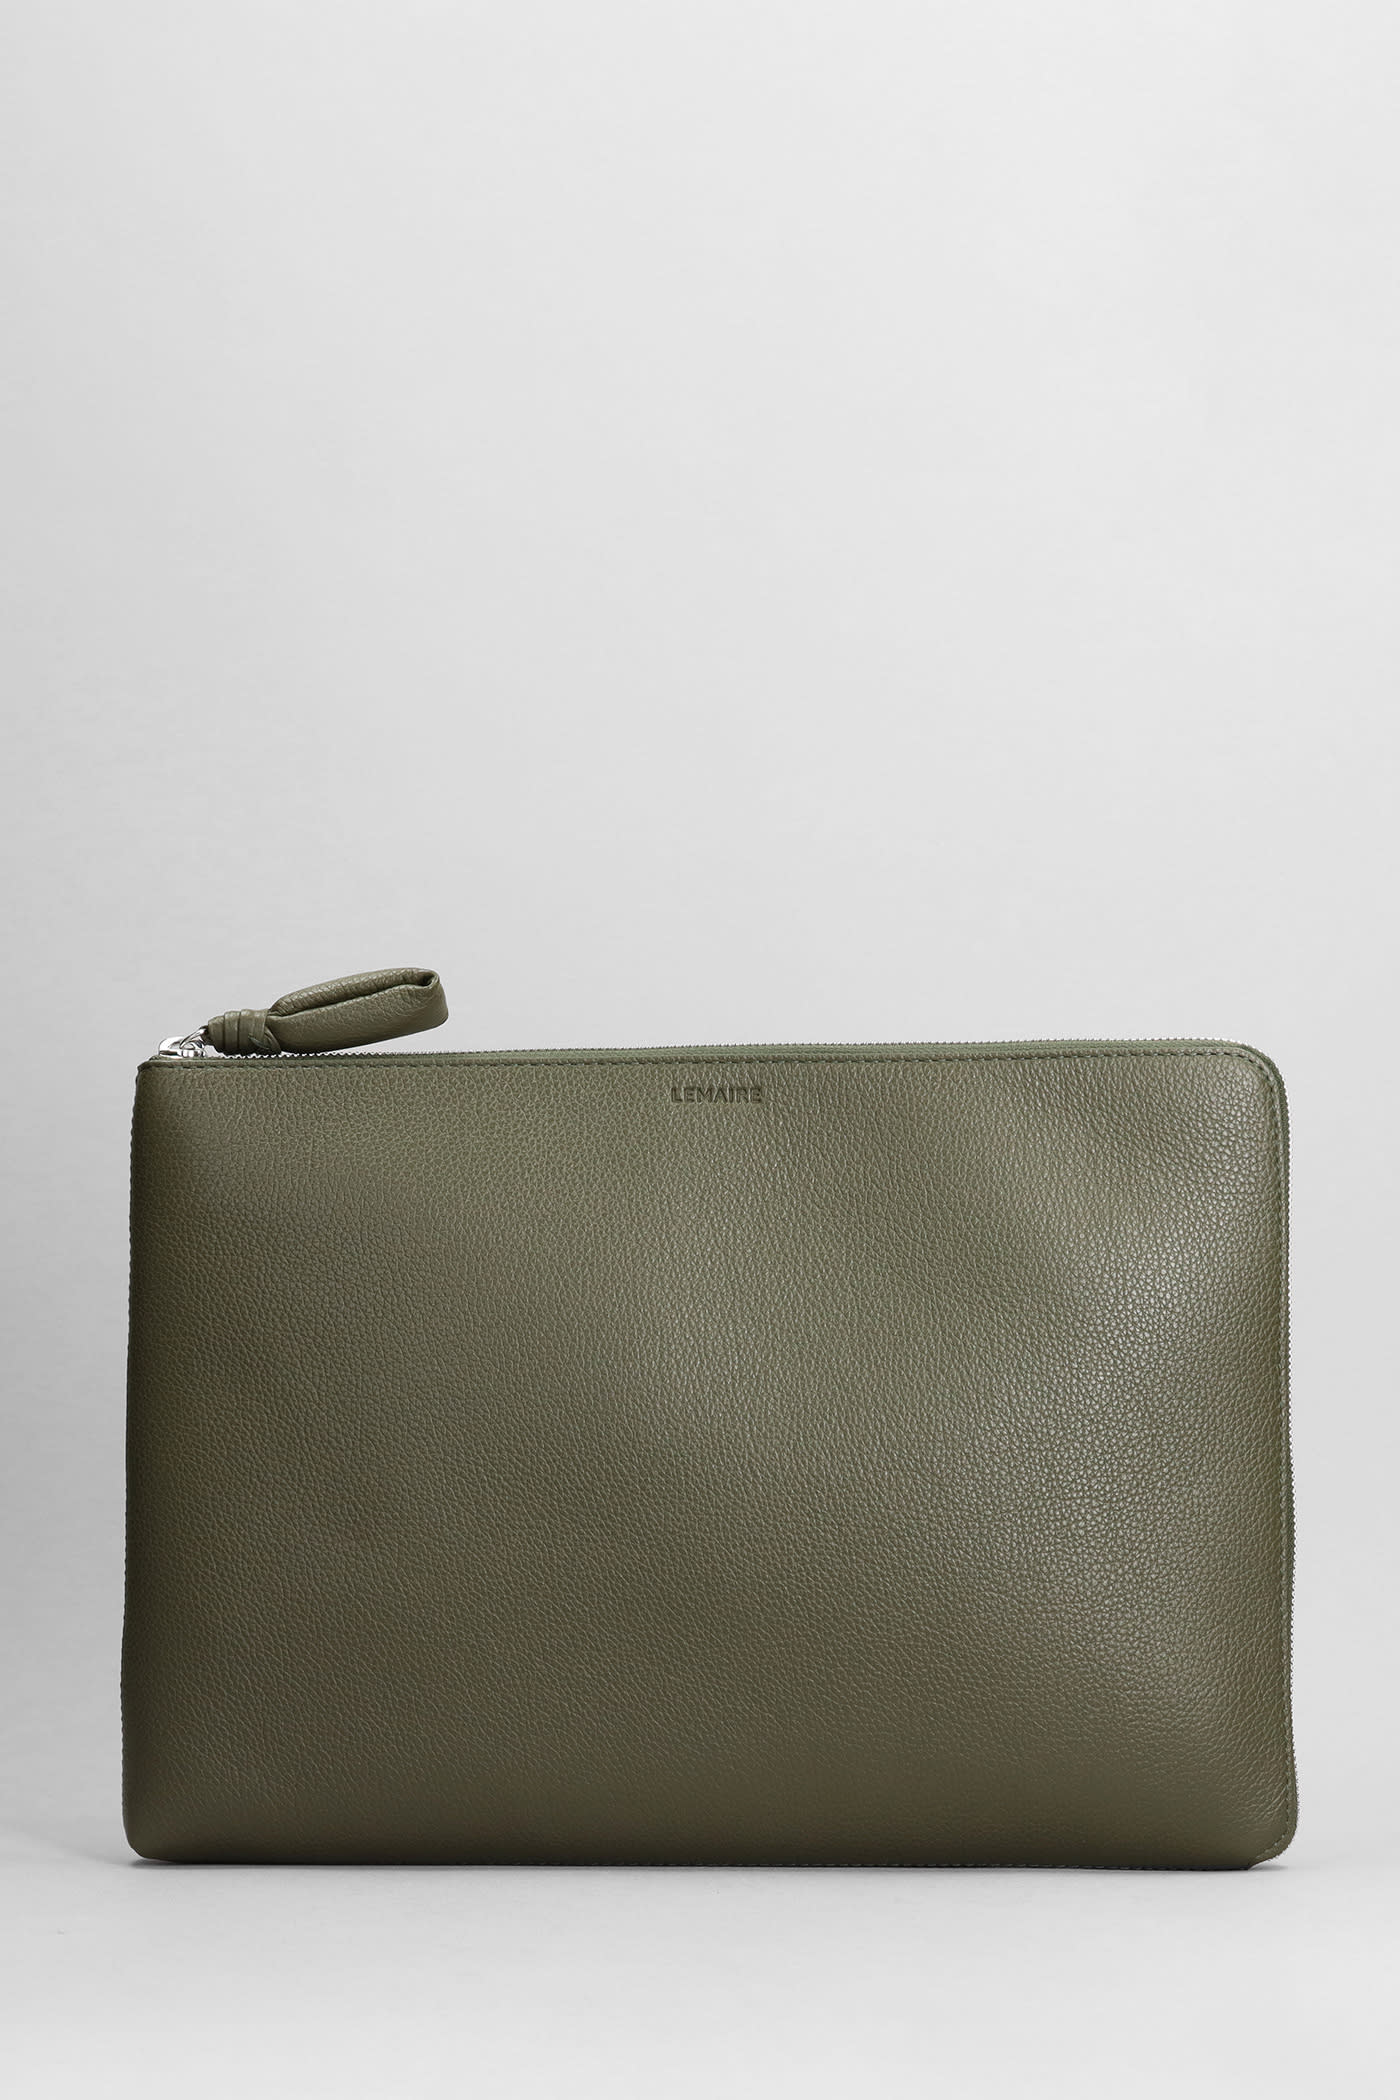 LEMAIRE DOCUMENT HOLDER CLUTCH IN GREEN LEATHER